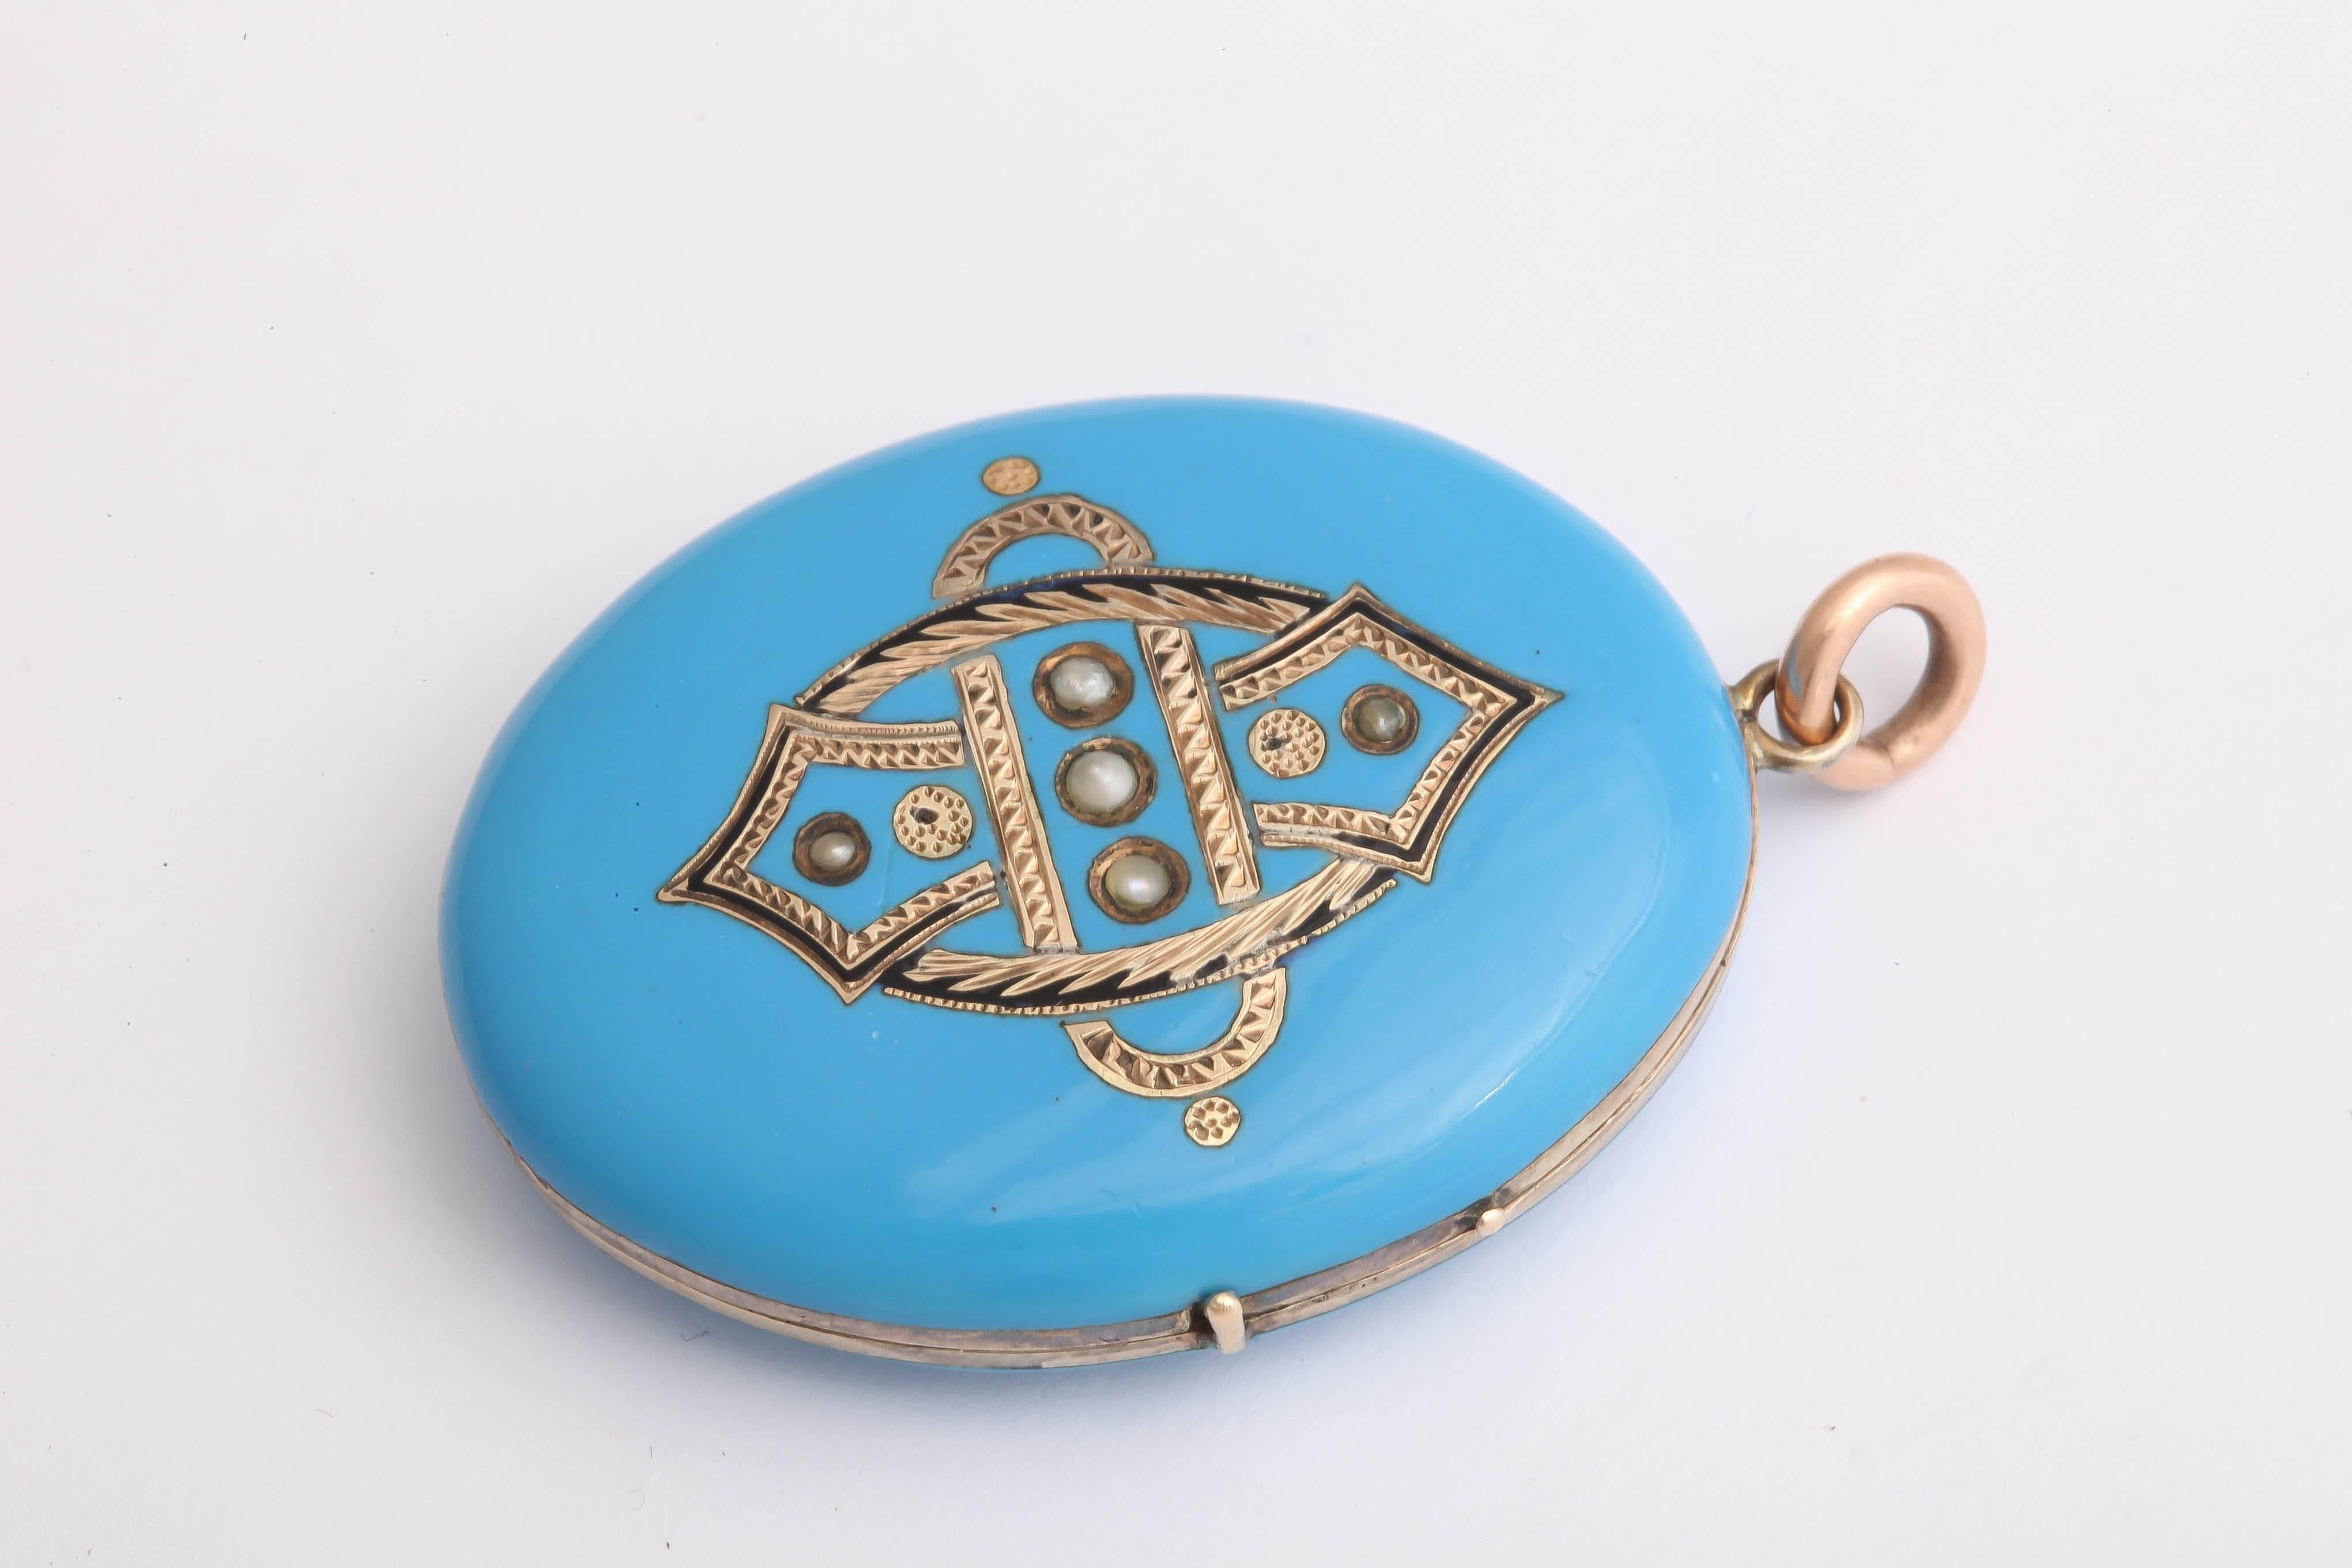 Elegant light blue enameling indicative of the Czech Republic appears on the front and back of this 10K yellow gold locket made in the Victorian era. Black enamel is inaid into the gold engraving on the front and 5 seed pearls  are set into the